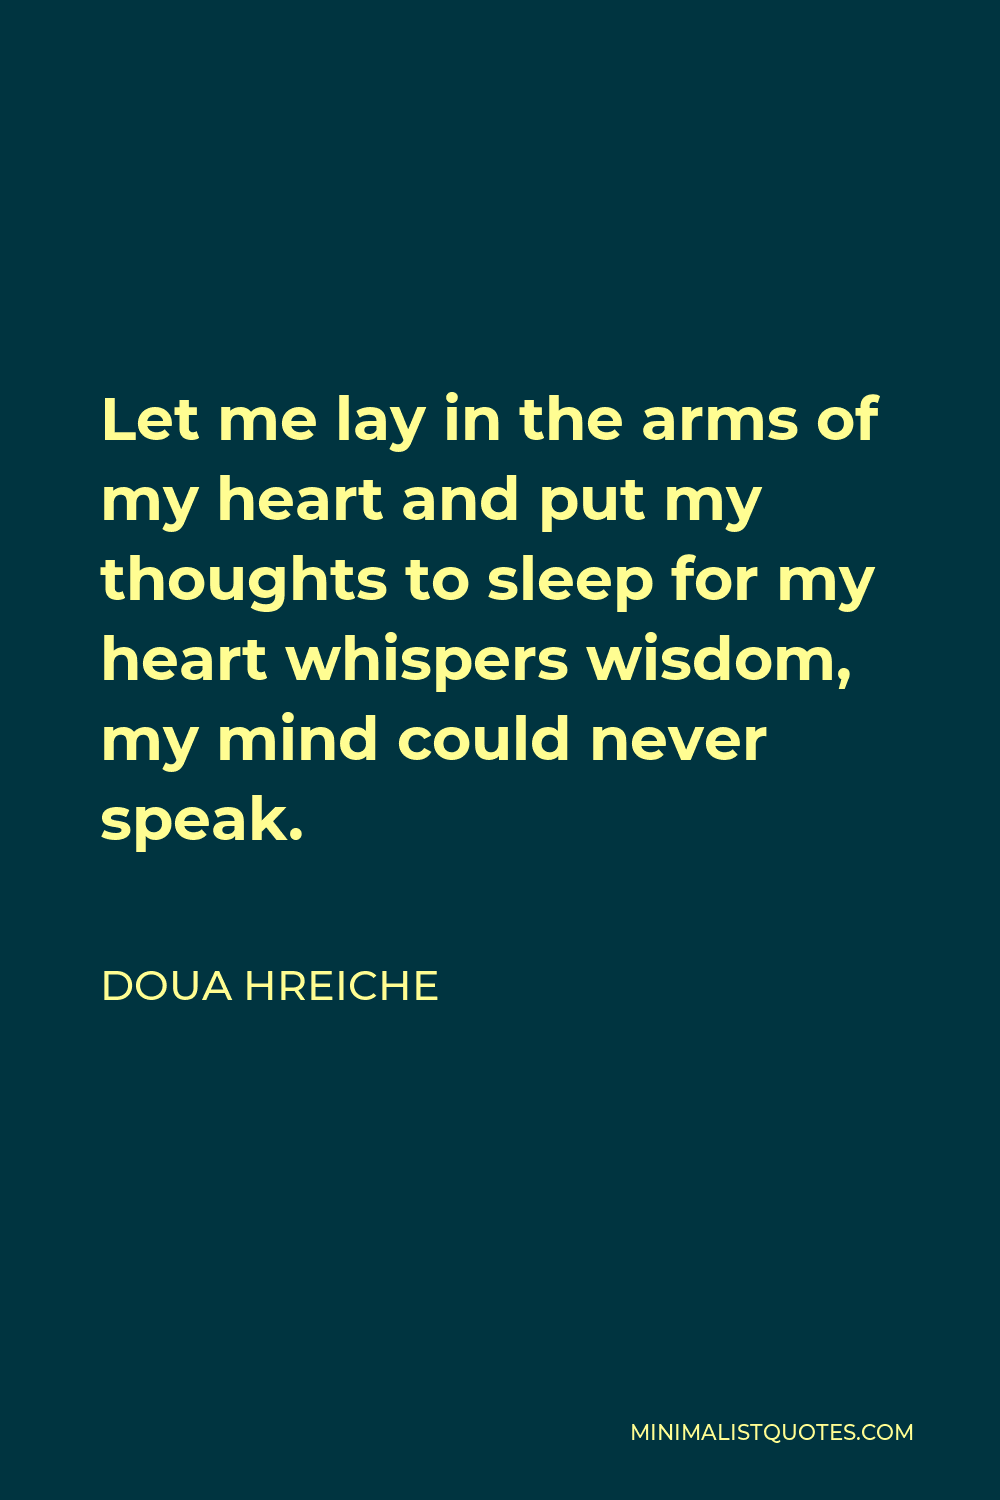 Doua Hreiche Quote - Let me lay in the arms of my heart and put my thoughts to sleep for my heart whispers wisdom, my mind could never speak.